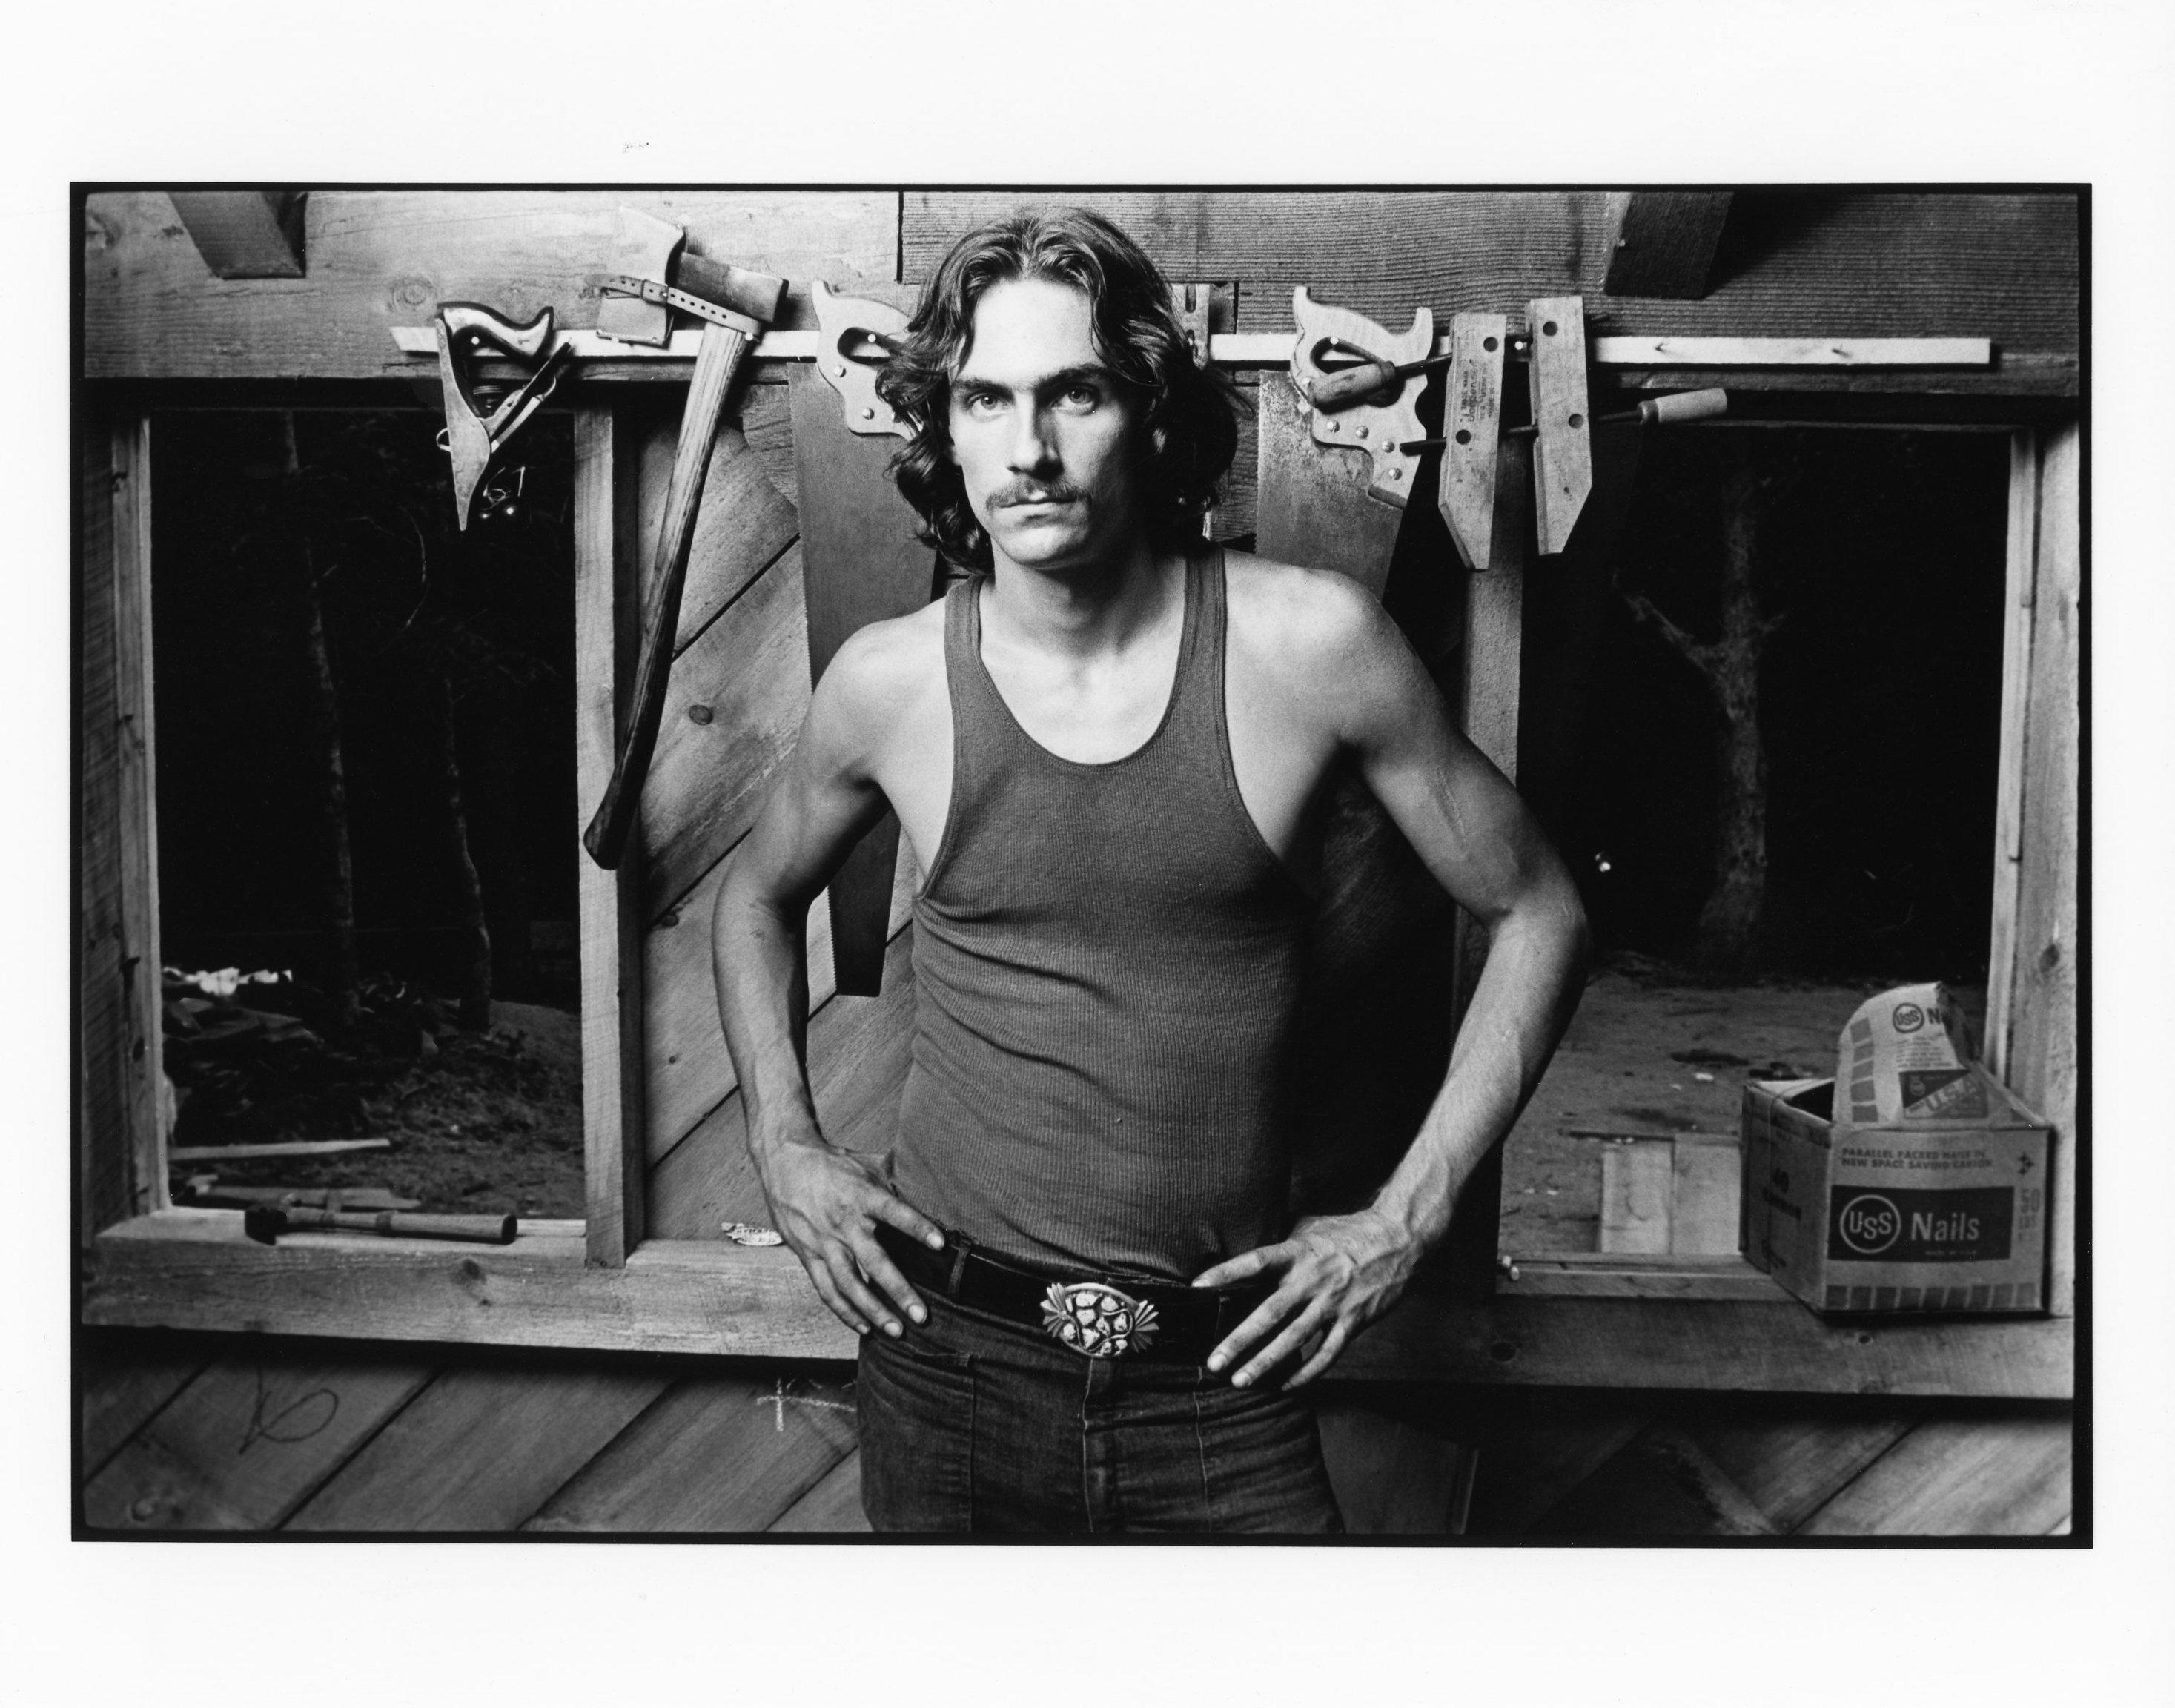 Original vintage 8x10” work print from Norman Seeff of James Taylor. Hand printed in 1978 at the time of the photoshoot, signed on the back by Norman Seeff

In excellent condition having been stored flat in a climate controlled room

These Norman